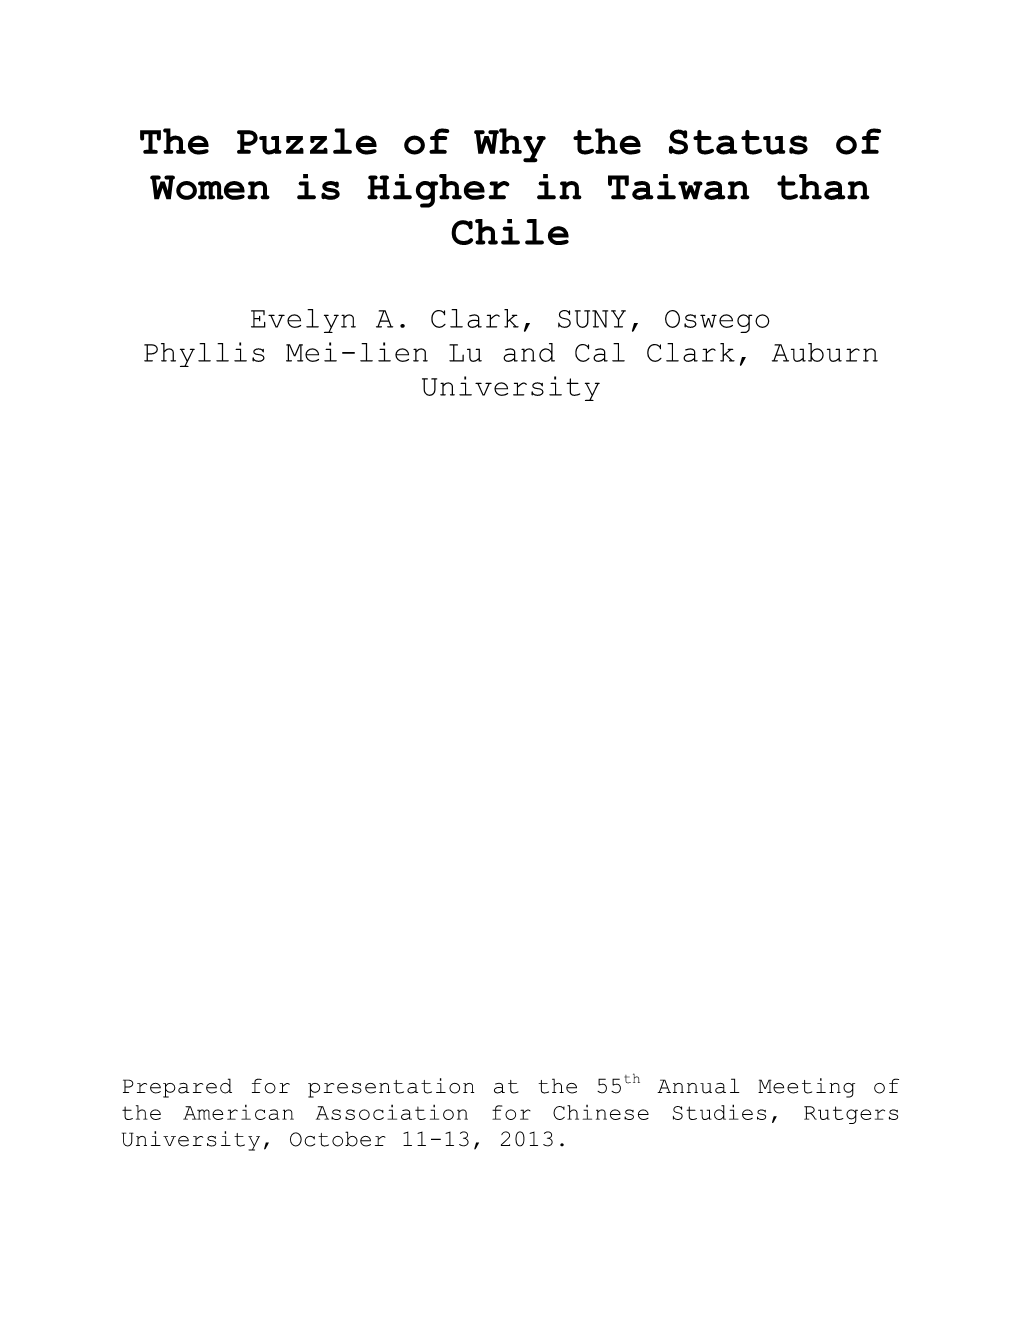 The Puzzle of Why the Status of Women Is Higher in Taiwan Than Chile